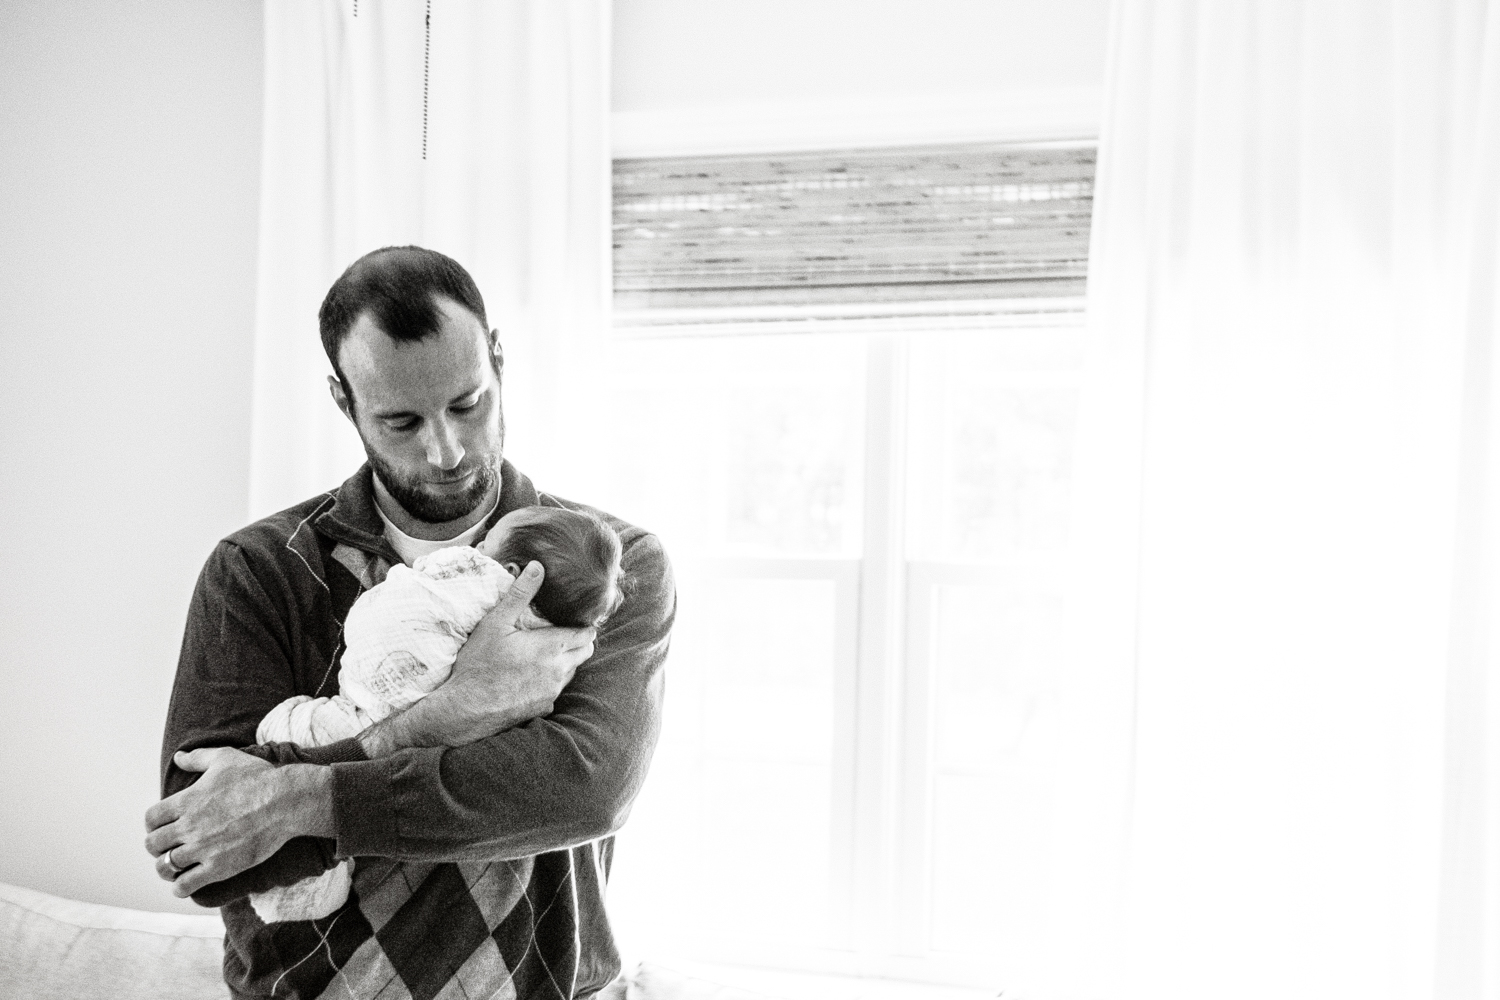 father holds infant daughter while standing by window in black and white photograph